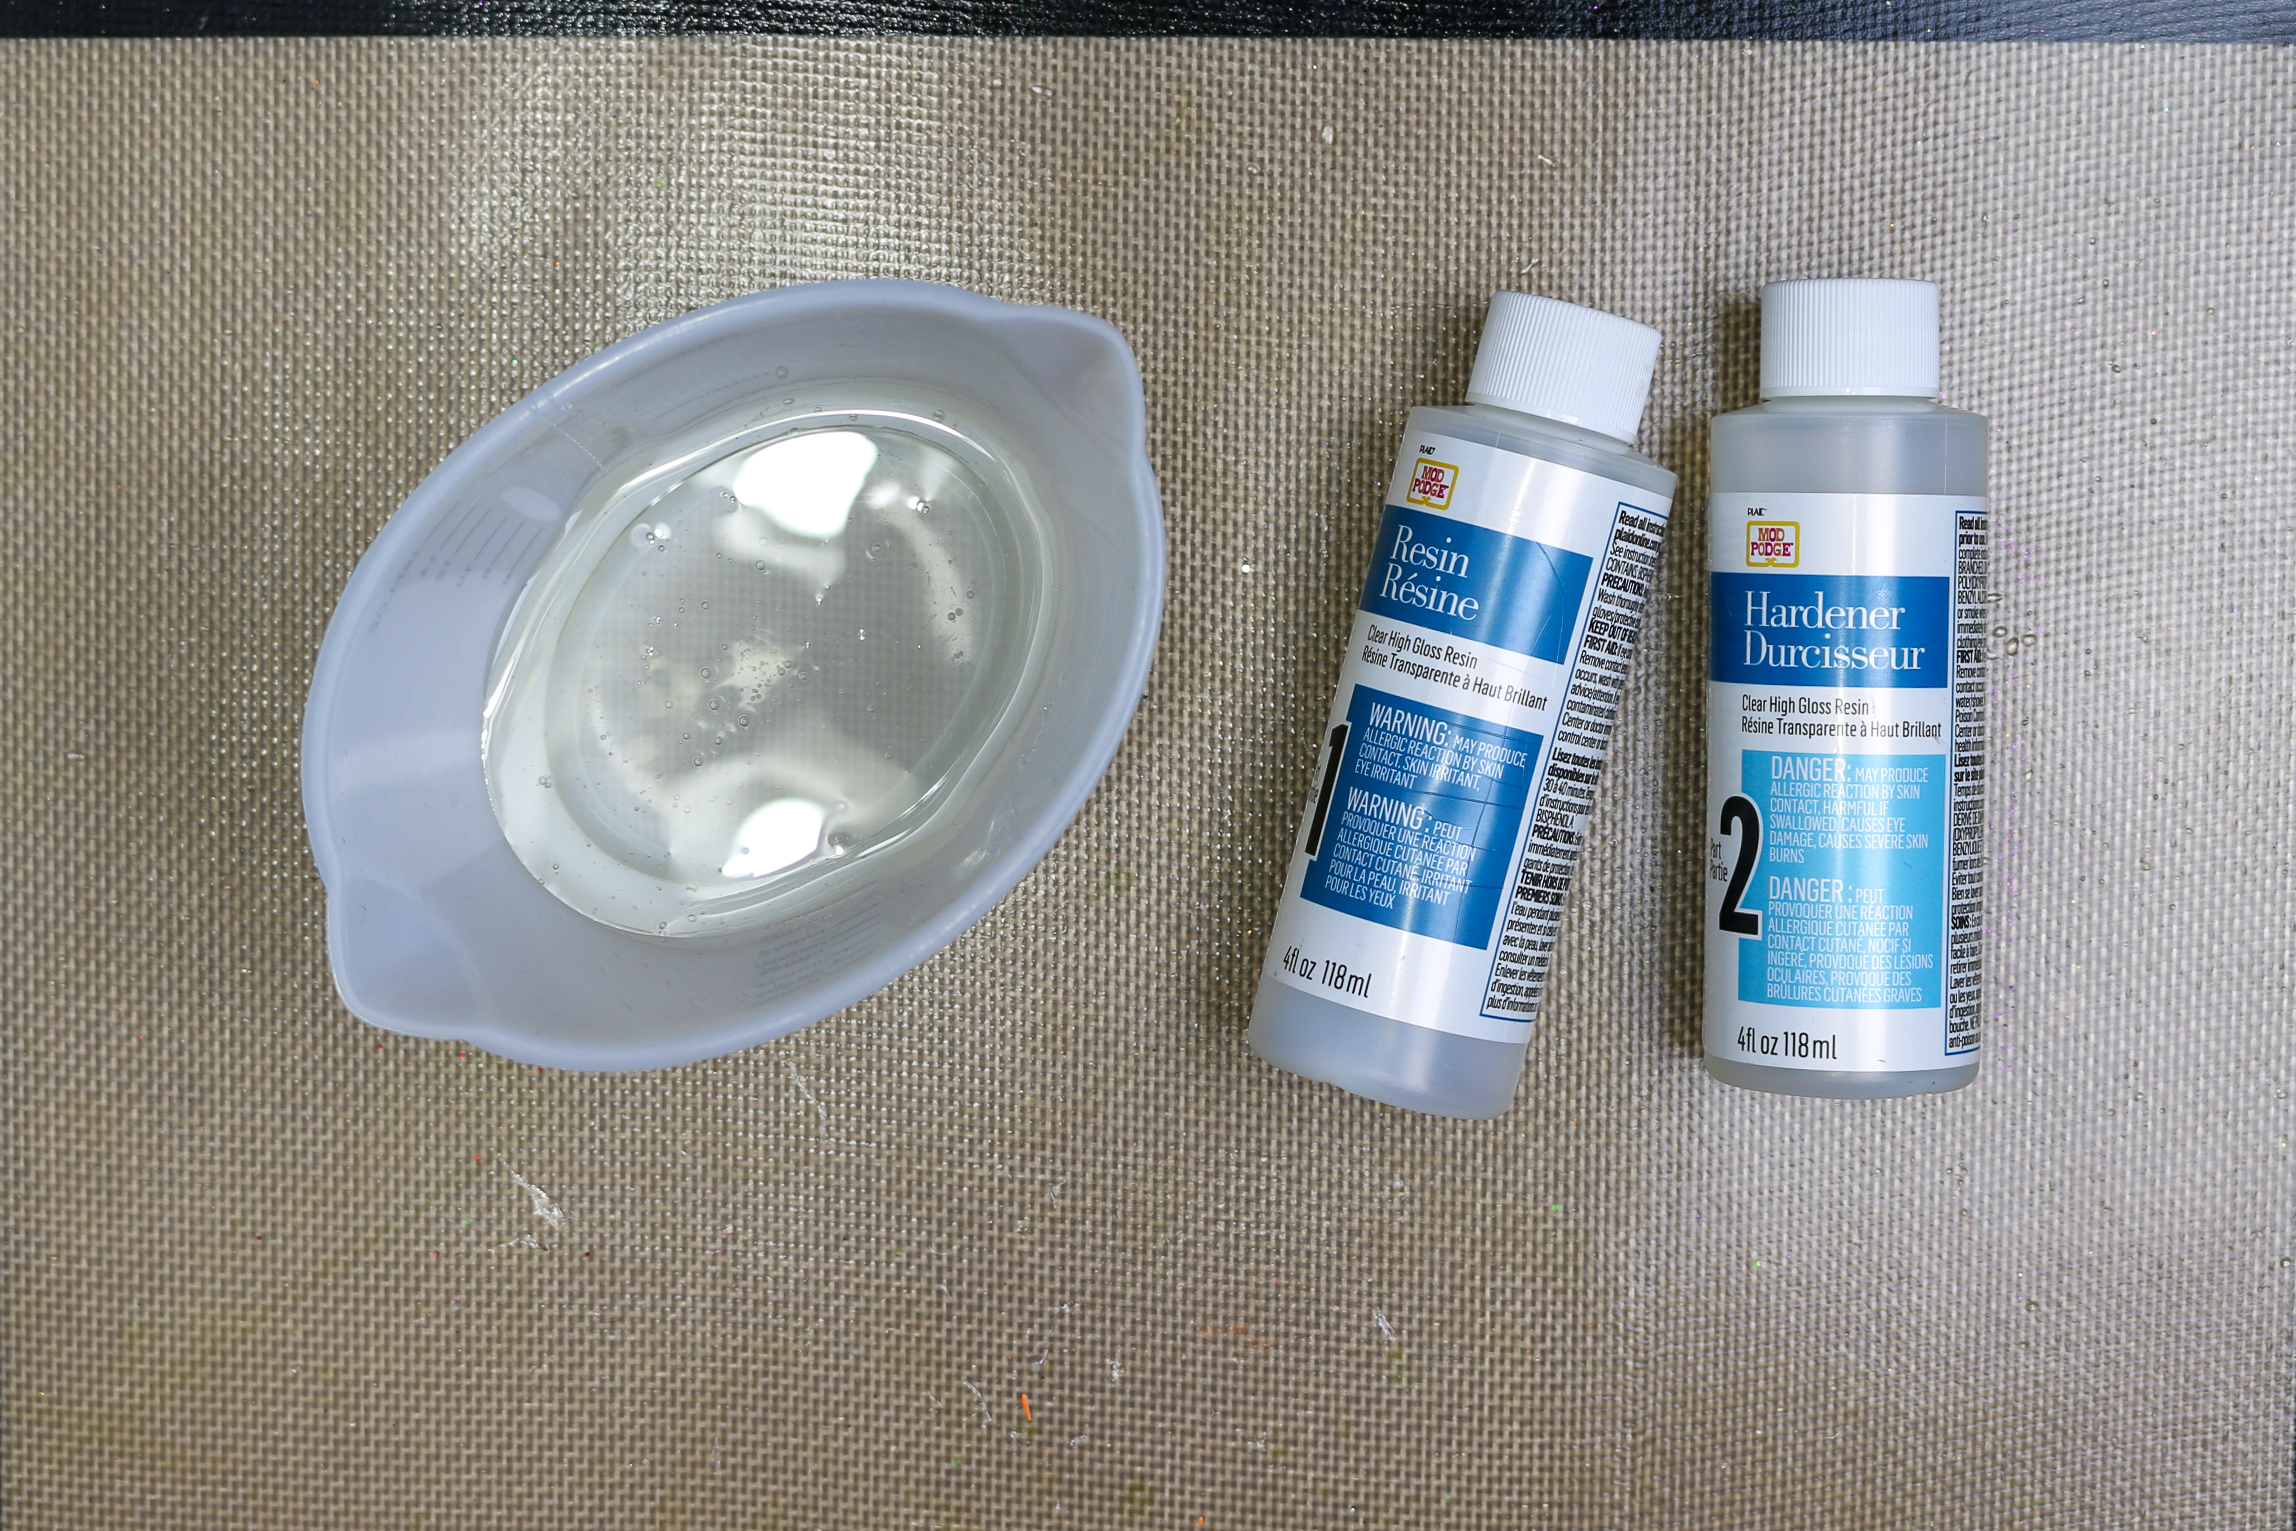 Mod Podge Resin and silicone mixing cup